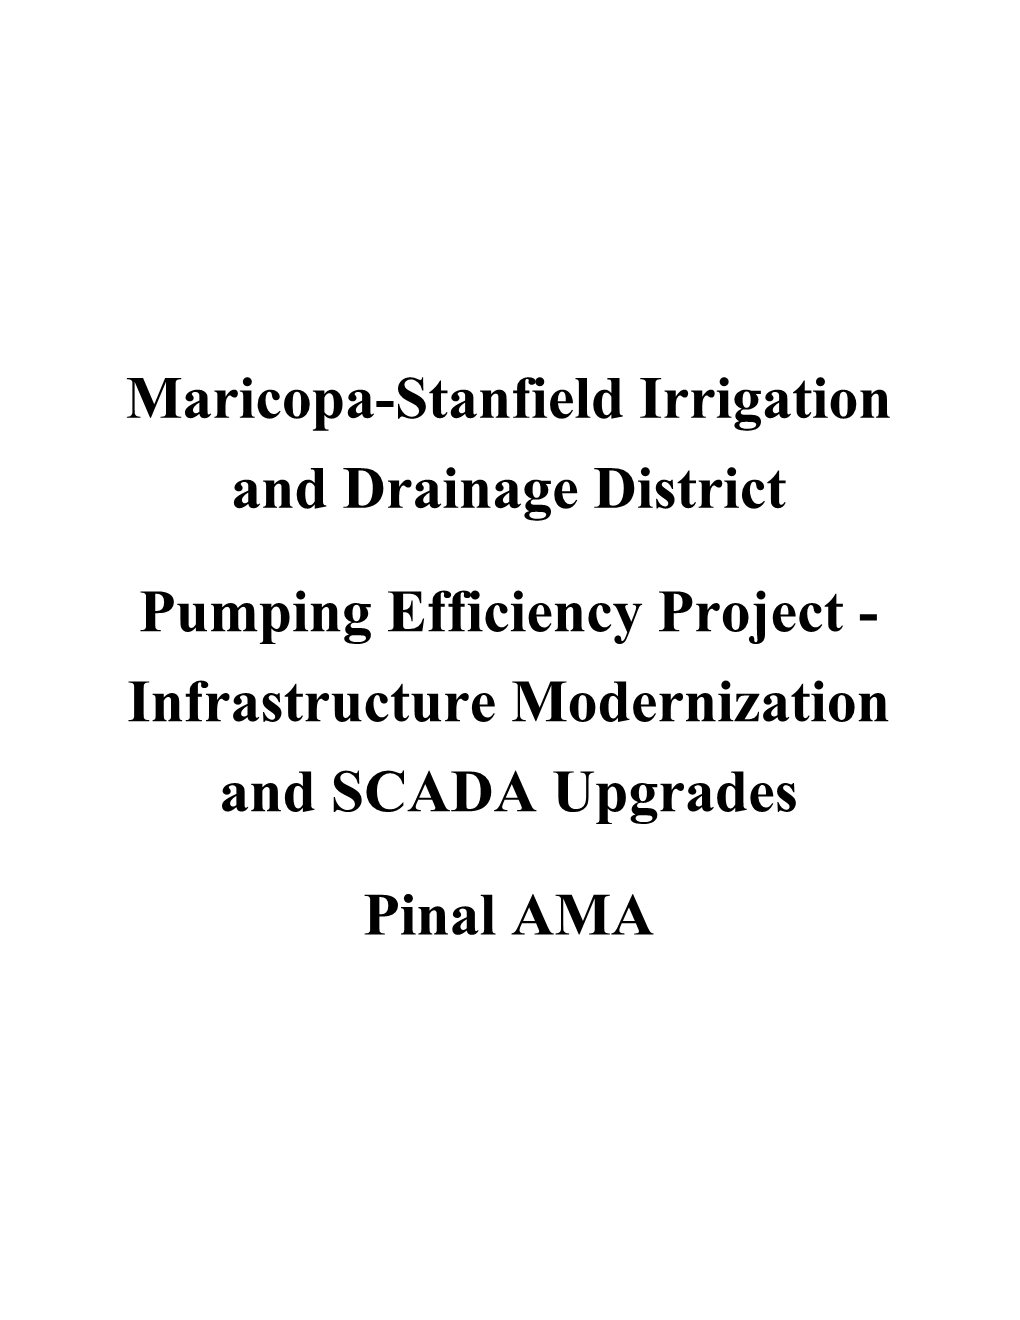 Maricopa-Stanfield Irrigation and Drainage District Pumping